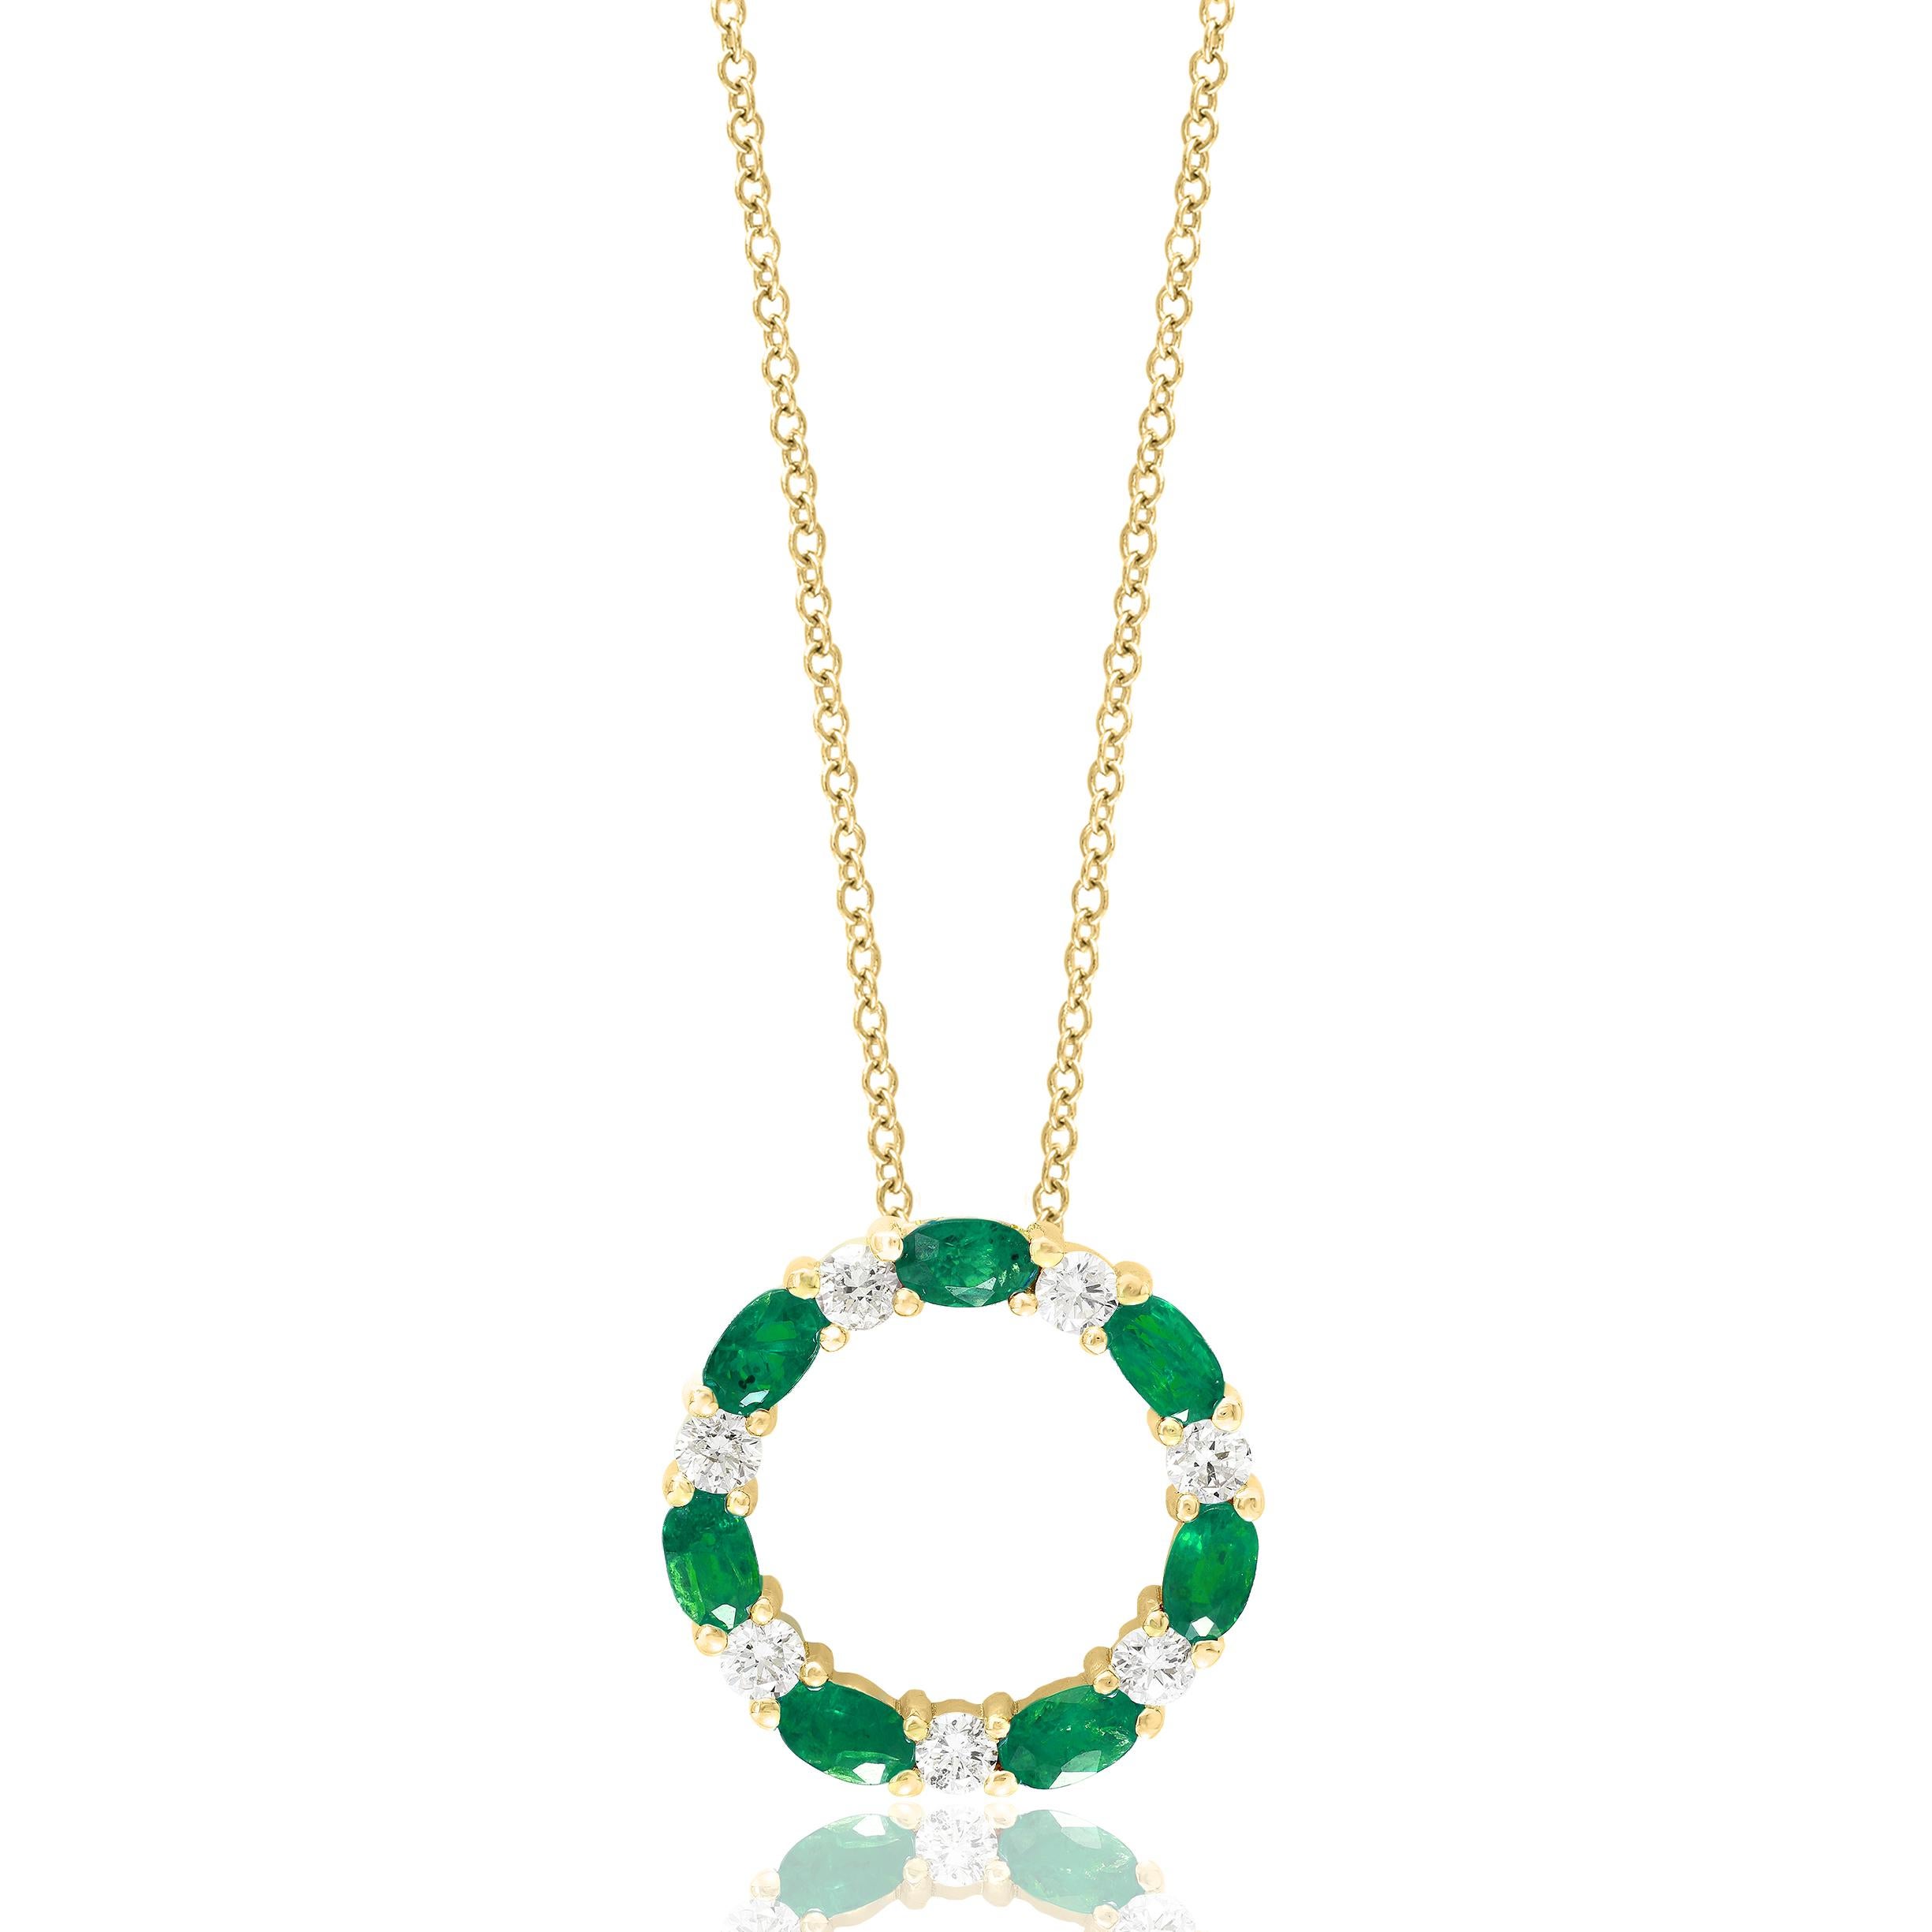 1.65 Carat Emerald and Diamond Circle Pendant Necklace in 14k Yellow Gold